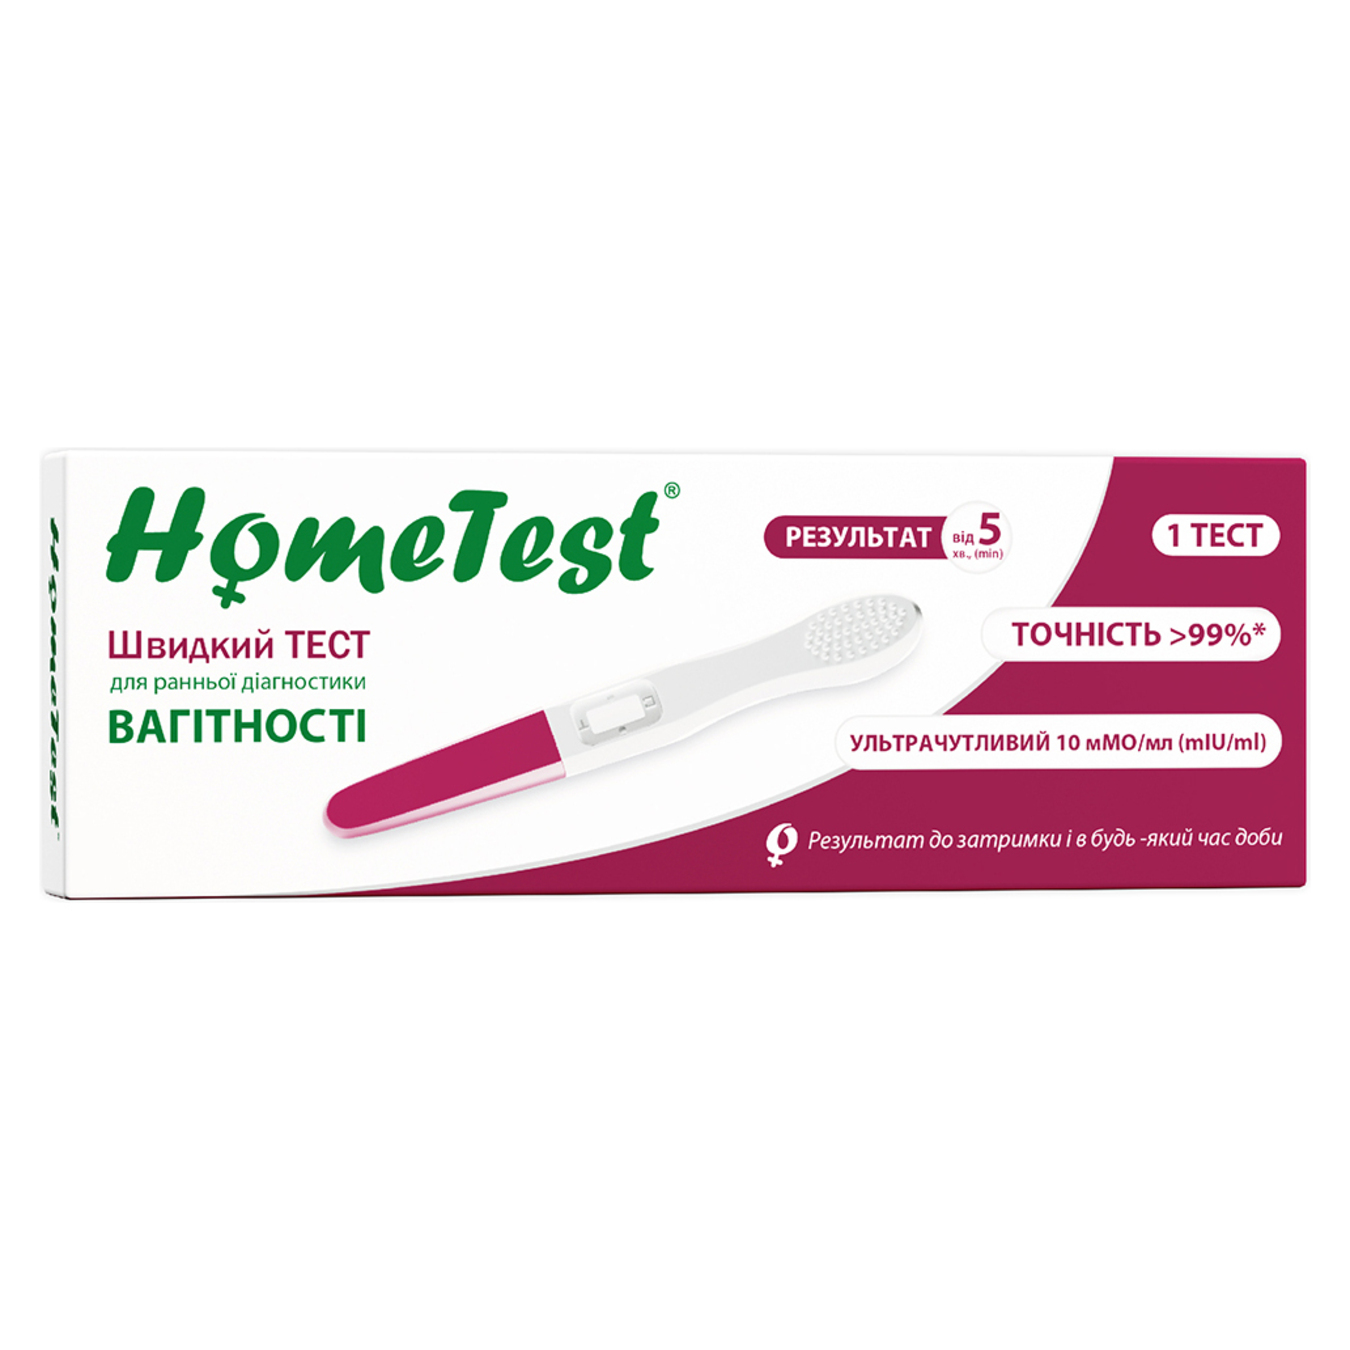 HomeTest Inkjet Test for Early Diagnosis of Pregnancy 1pcs in Package